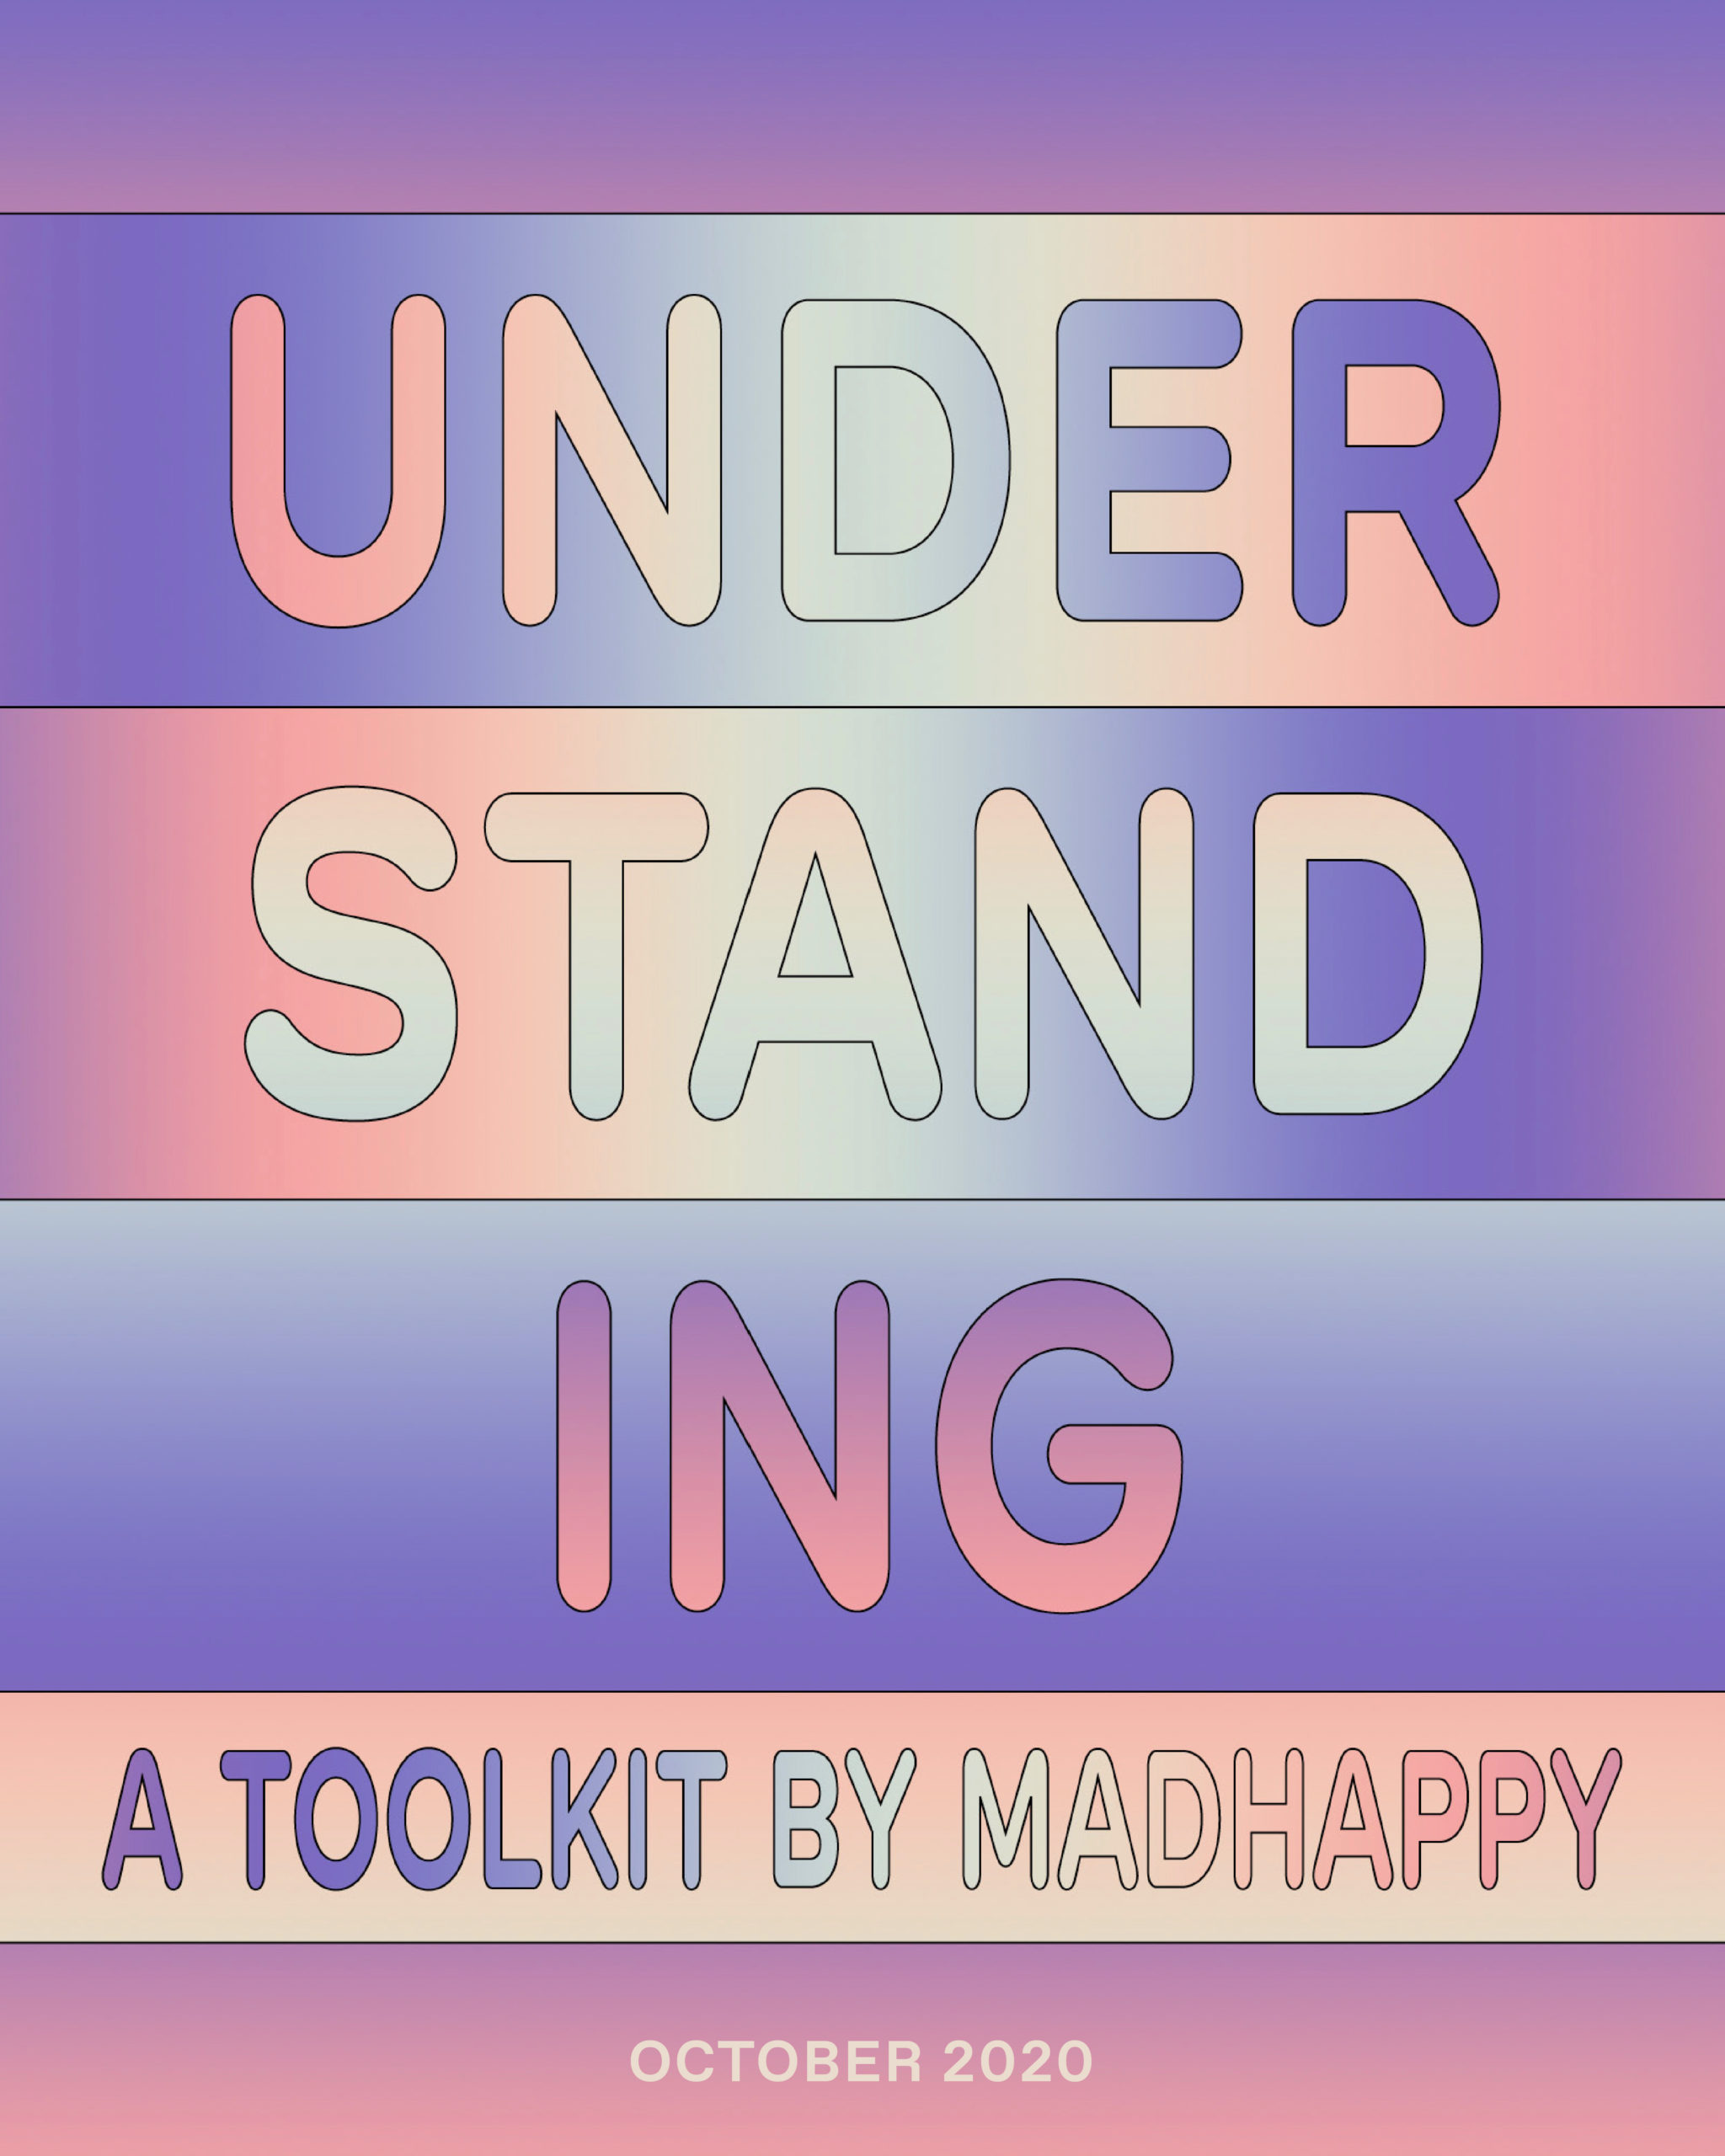 Pink and purple visual stating "Understanding A Toolkit by Madhappy"